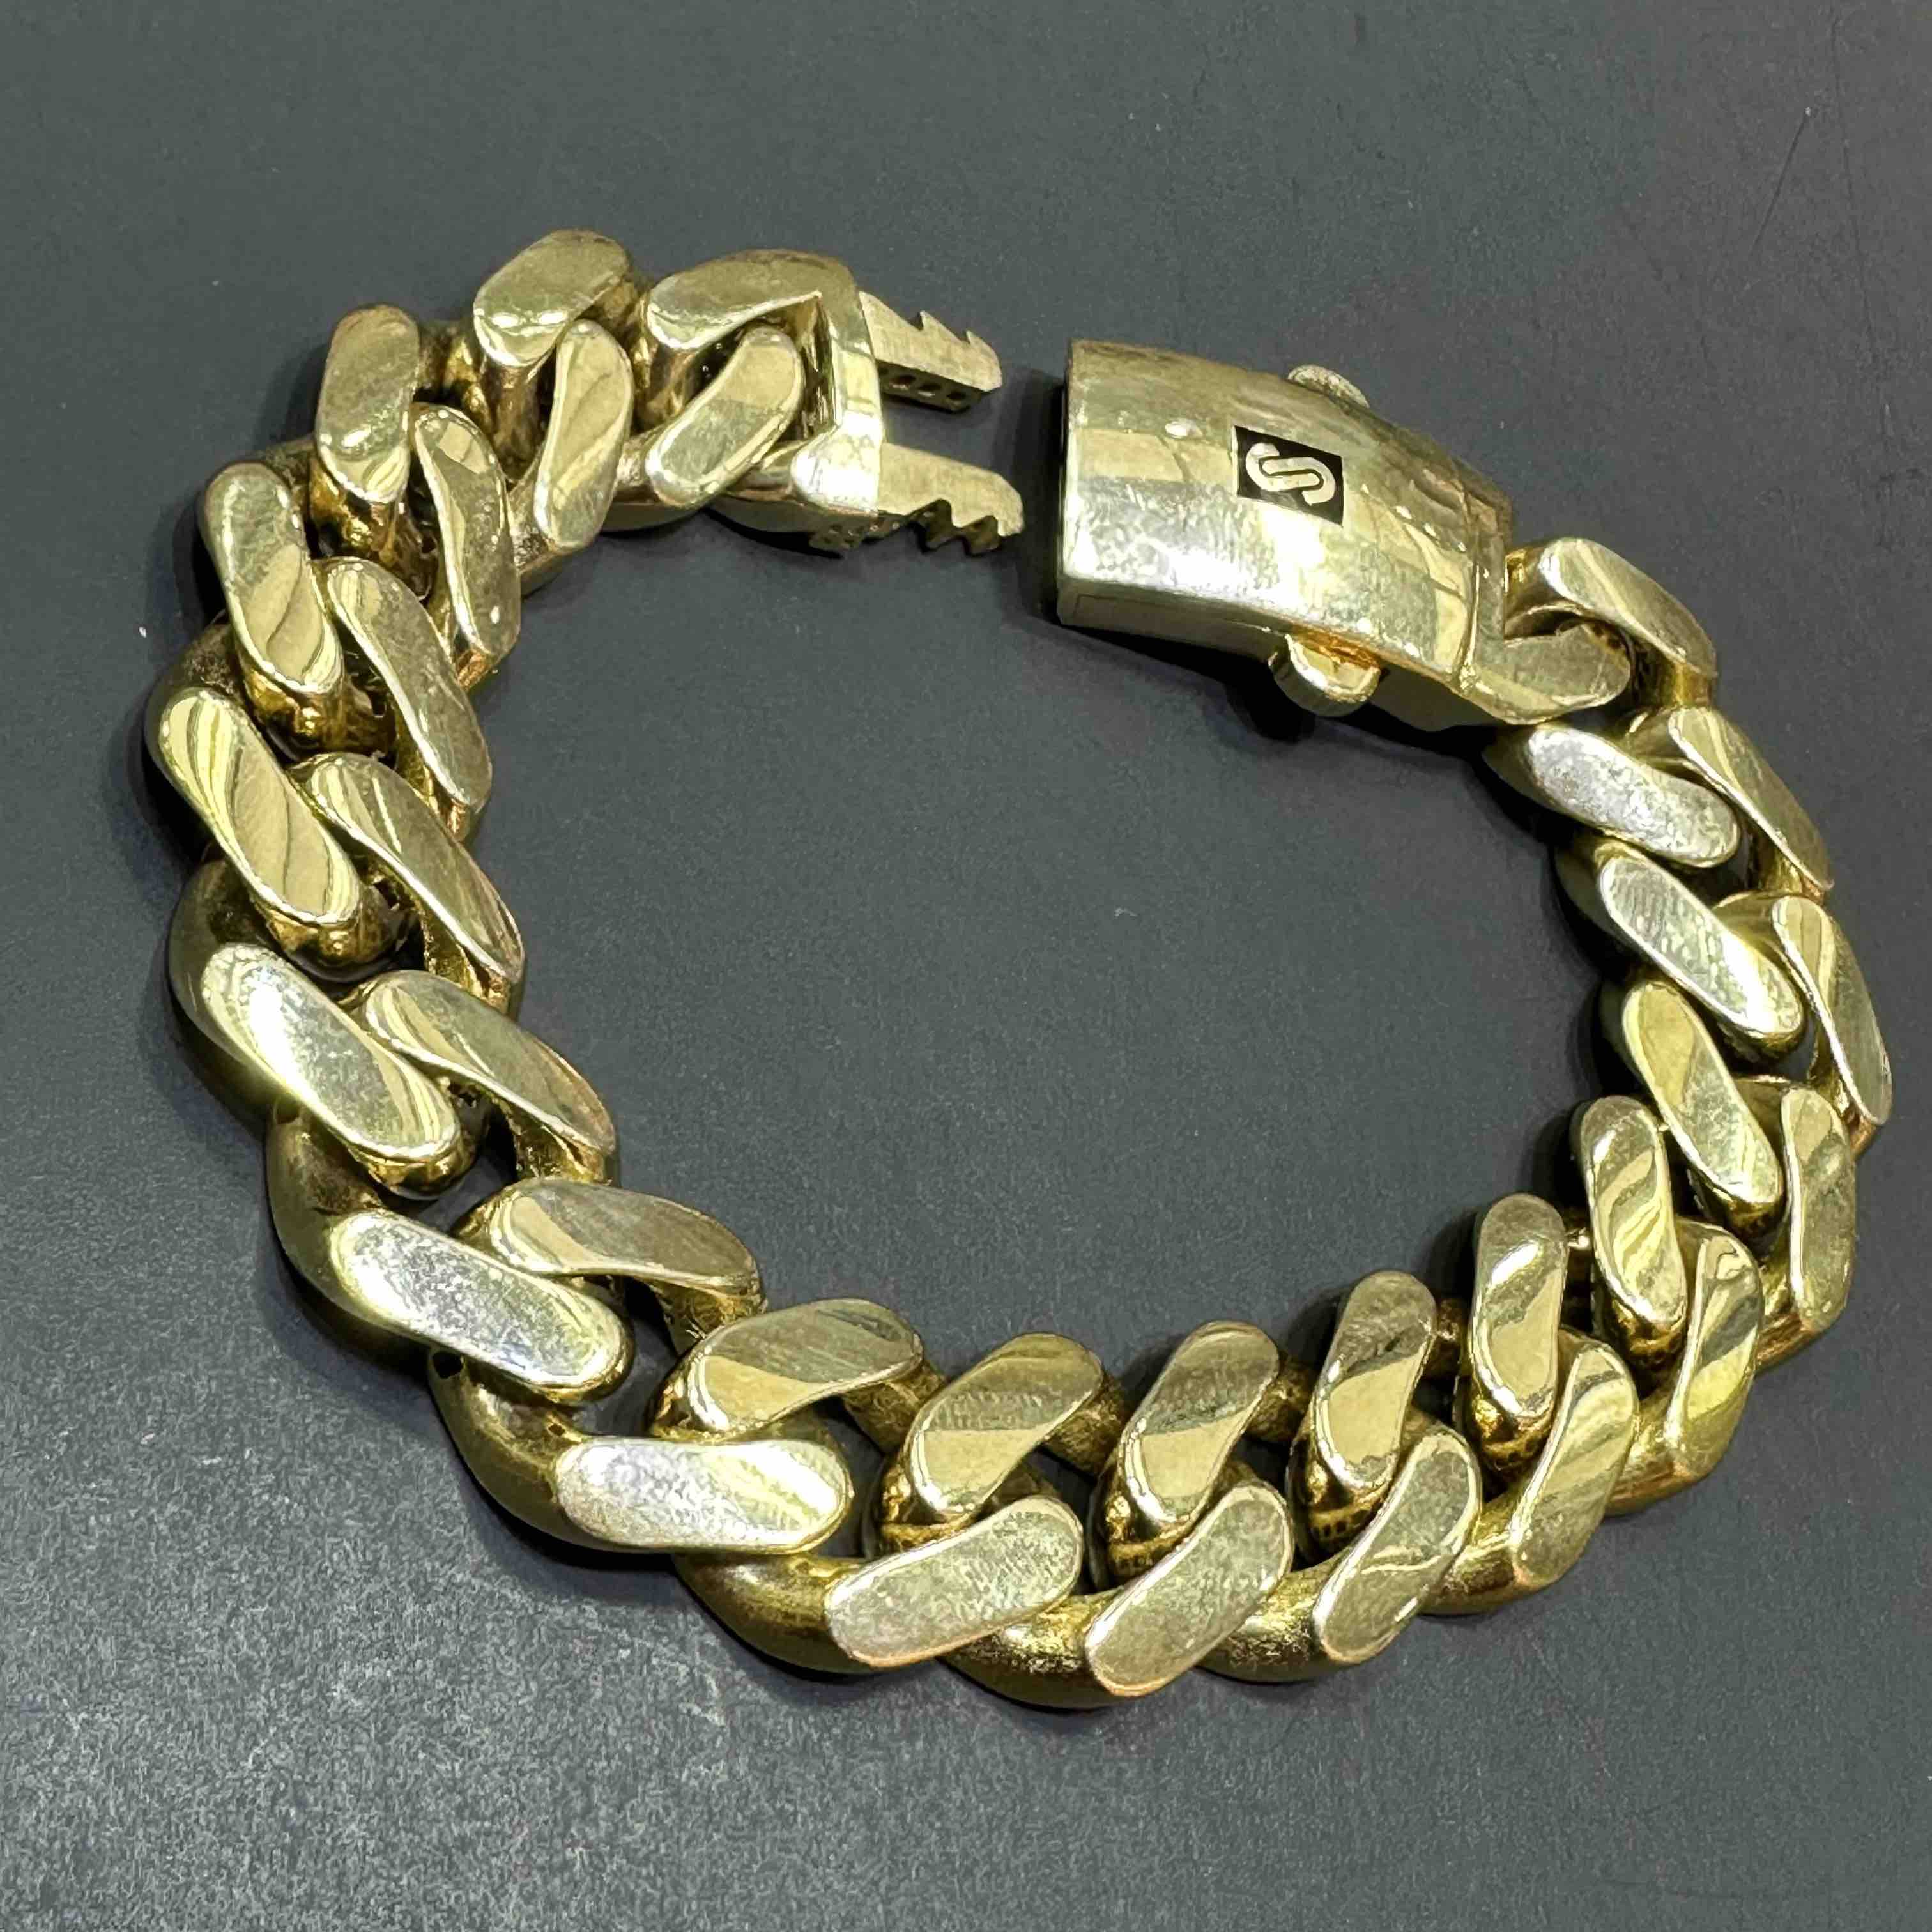 HIP HOP High-Quality Iced Out Bracelet Paved Bling Zircon Stone Gold C |  Gold cuban link chain, Bracelets for men, Stone gold